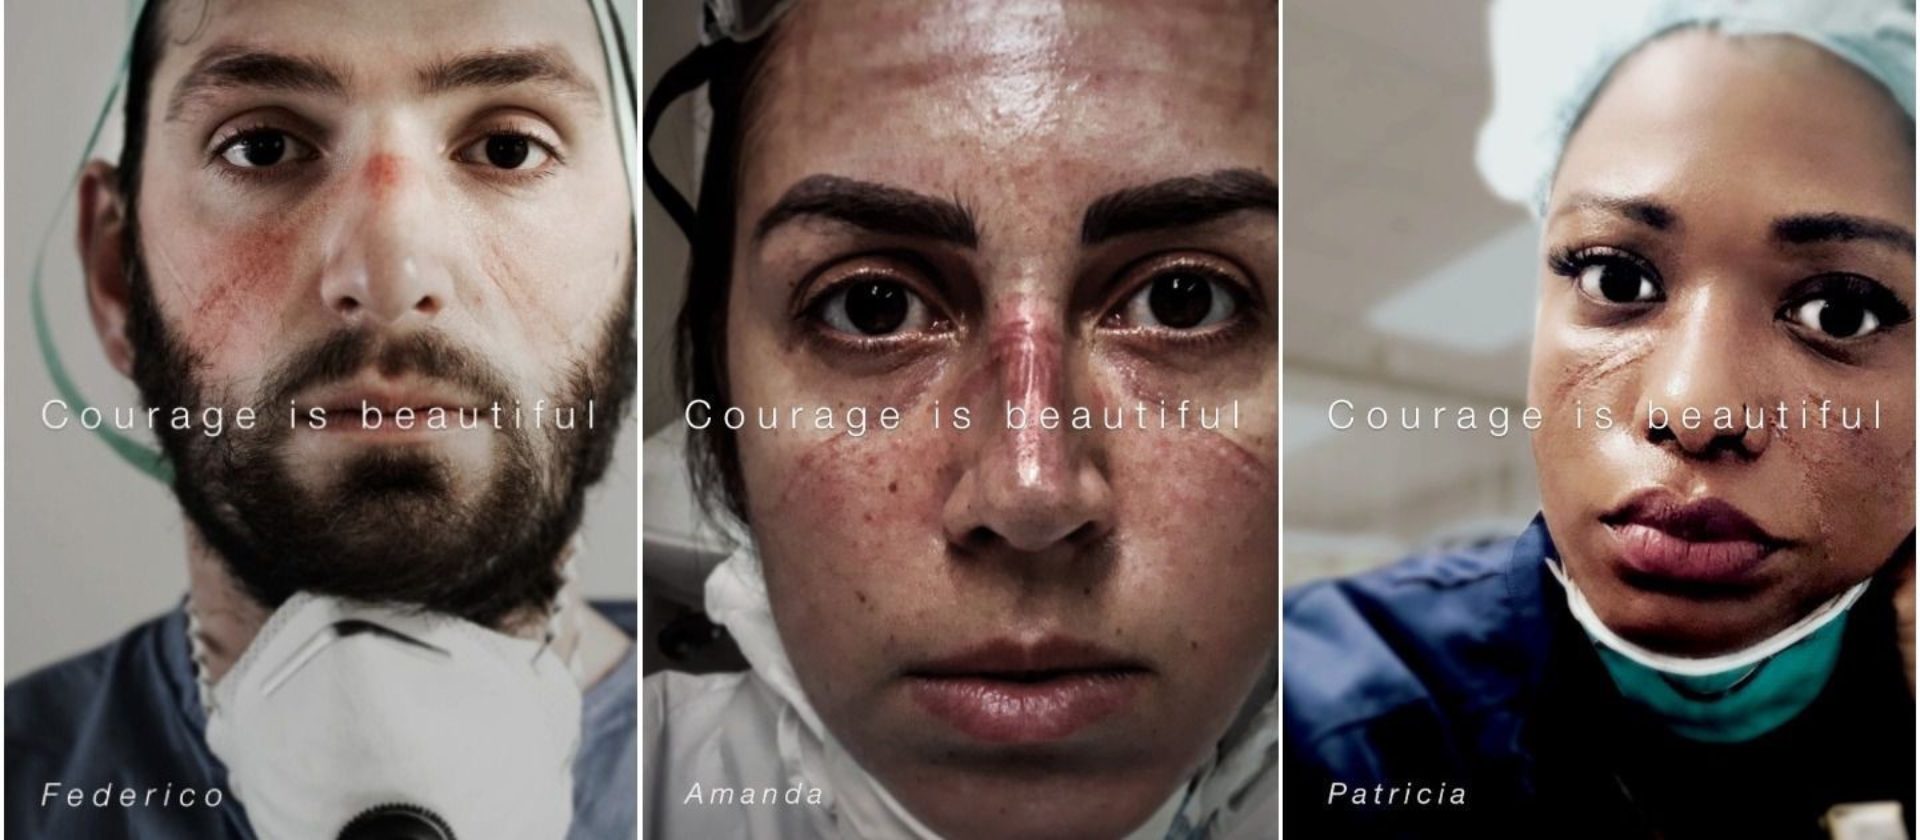 Dove courage is beautiful